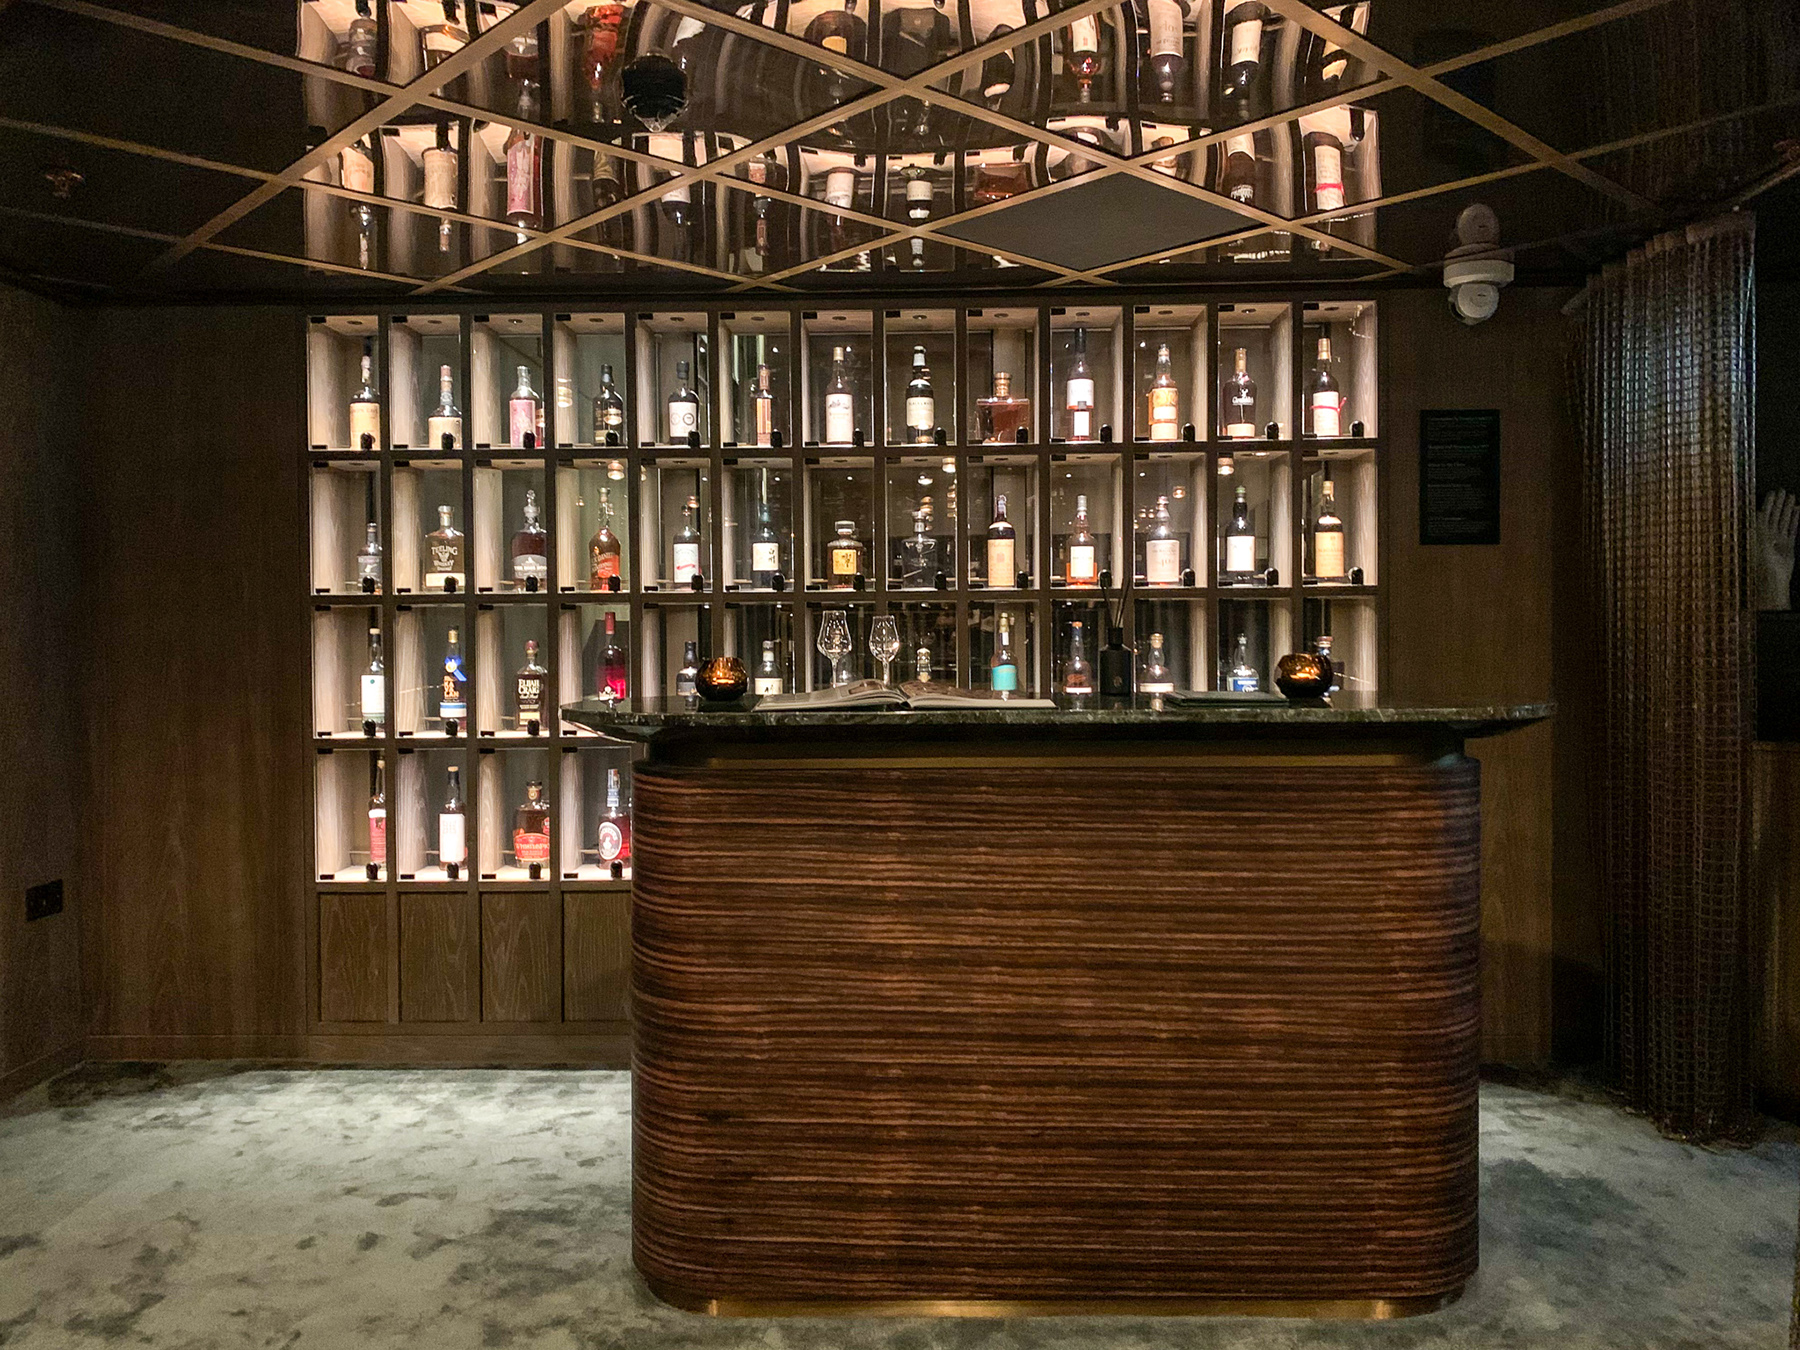 Guests only "Residence" offers a private whiskey bar with over 50 bottles